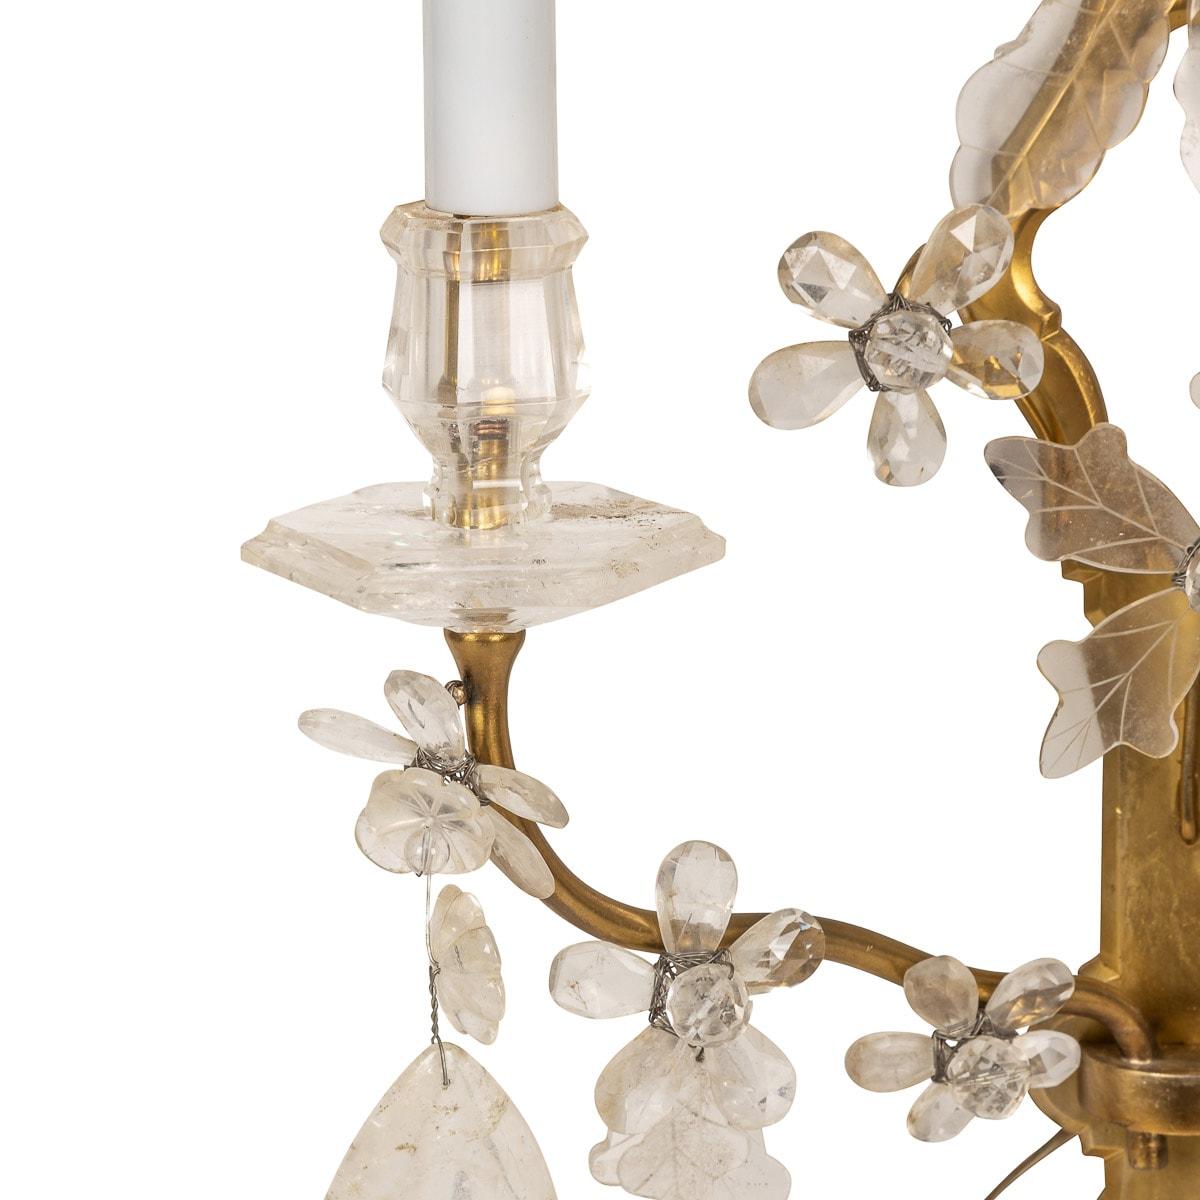 20th Century French Baroque Style D'appliques Wall Lights, Maison Bagues, c.1900 For Sale 5